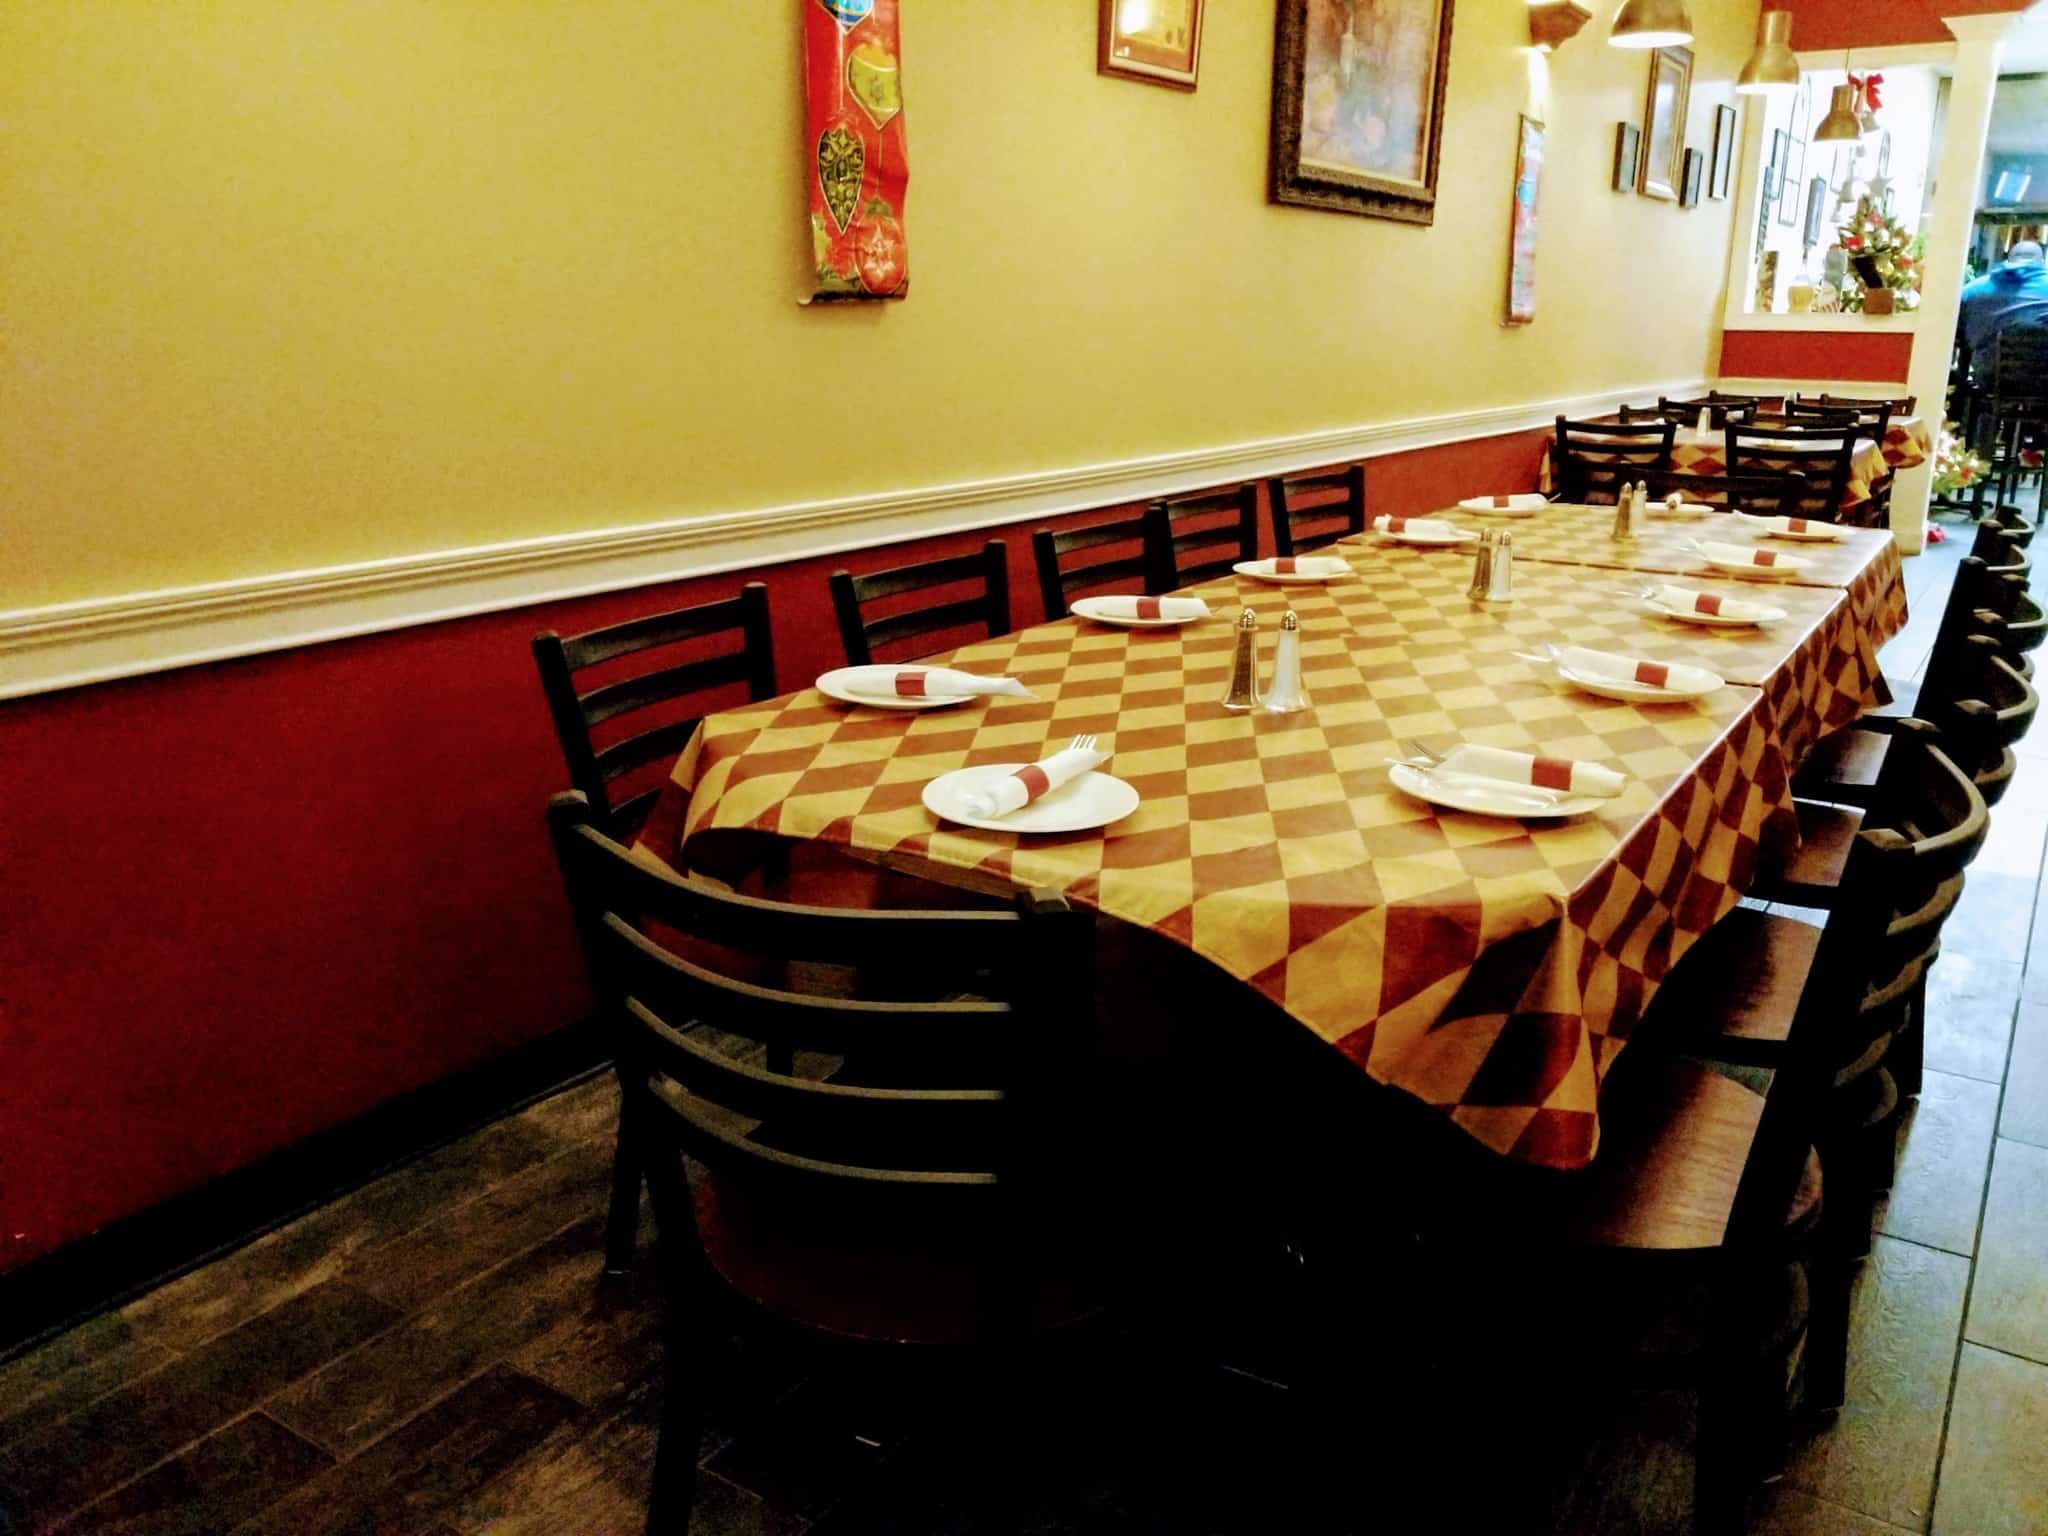 Dining tables at Primavera's Cafe.